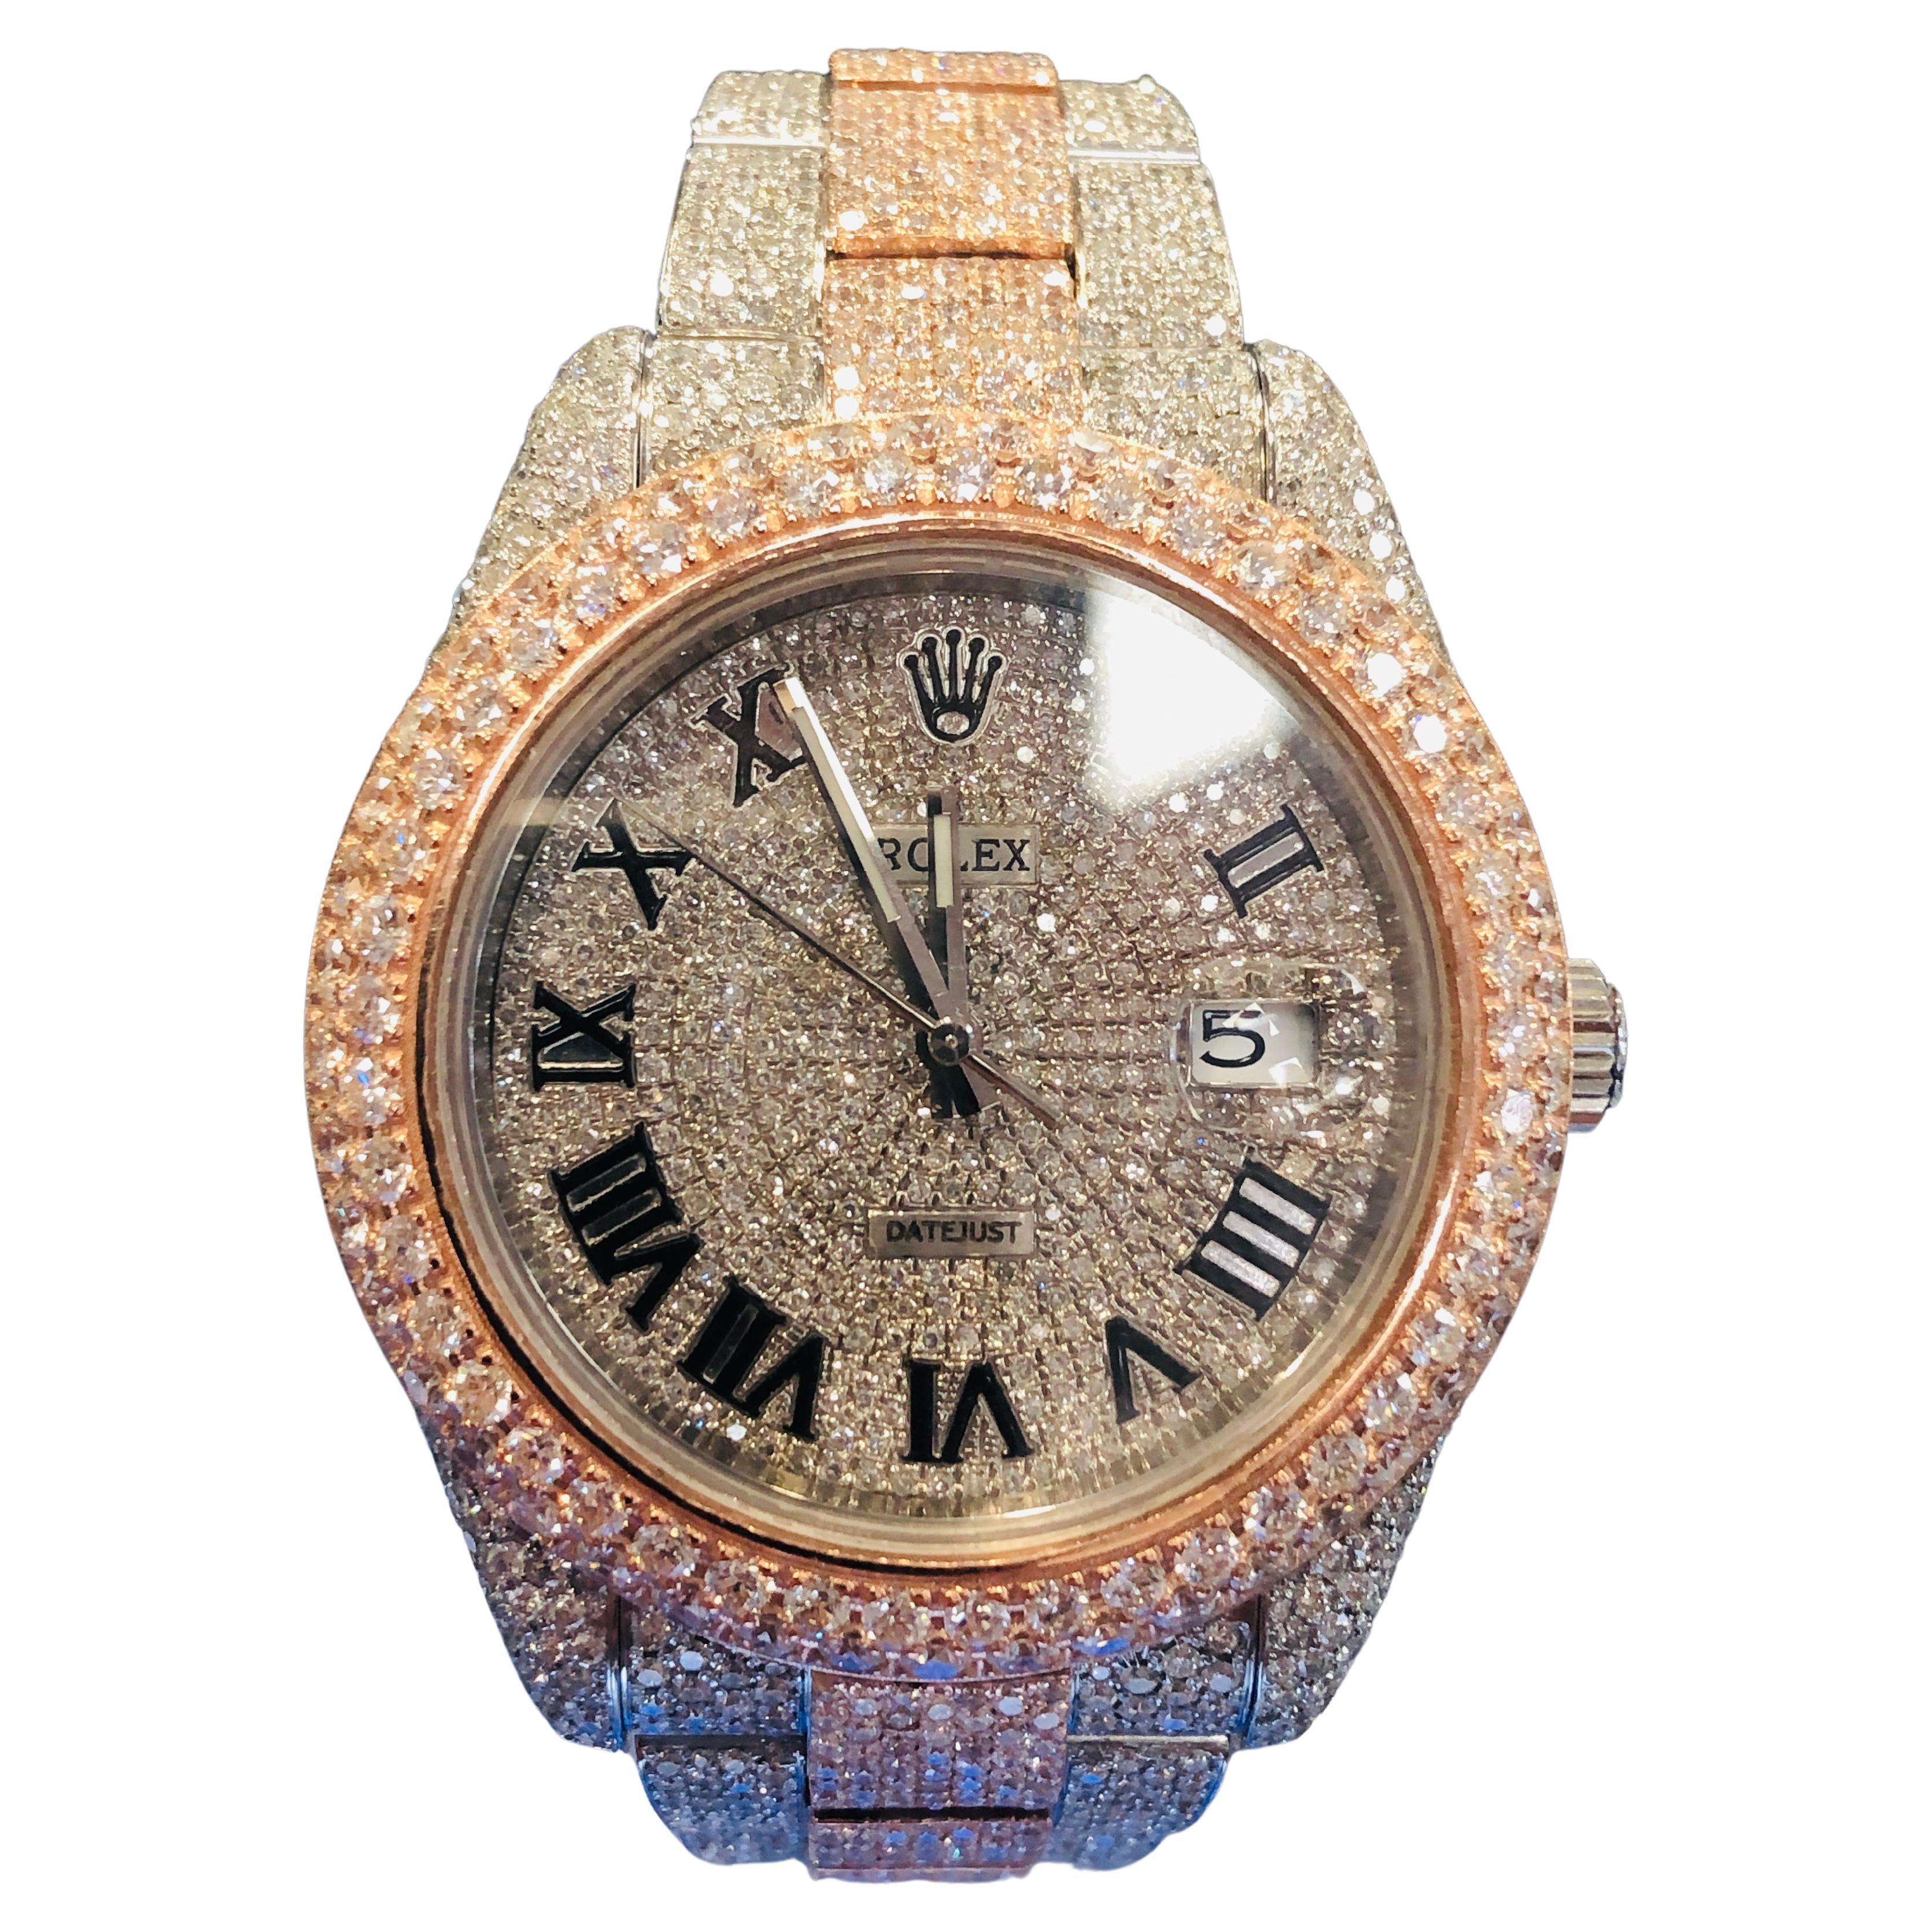 Datejust Custom Two Tone Rose Oyster Diamond Iced Out Watch Sale at iced out rolex, rolex iced out, iced out diamond rolex